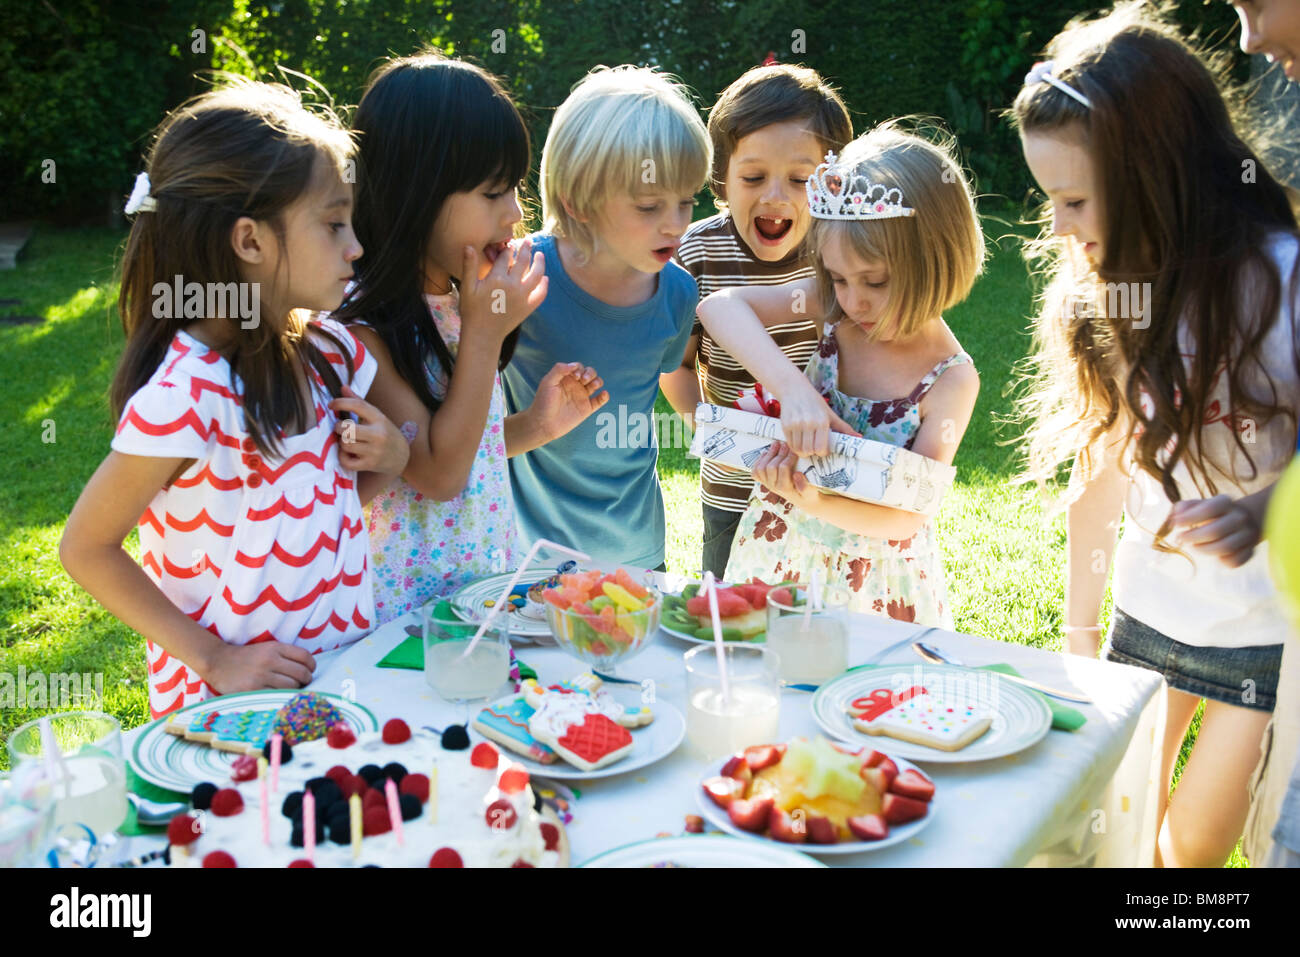 Girl opening gift at birthday party as friends watch Stock Photo